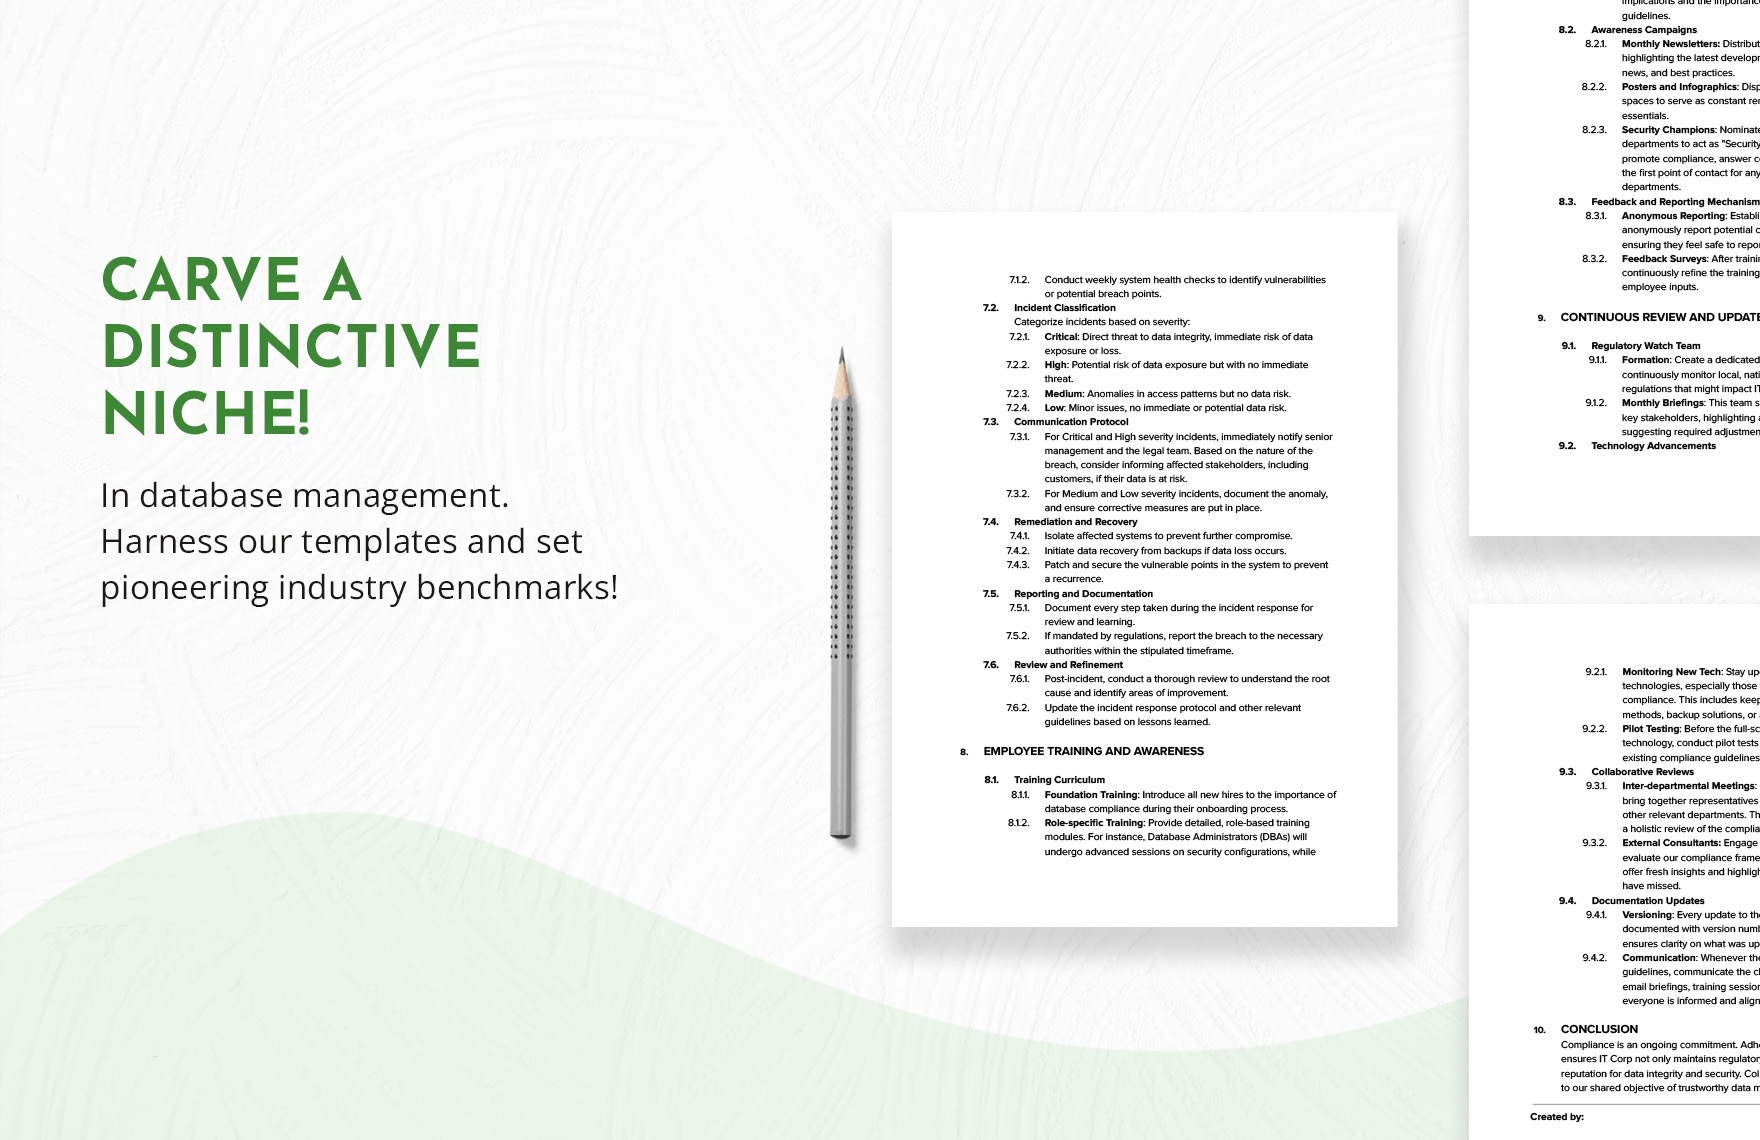 IT Database Compliance Guidelines Template